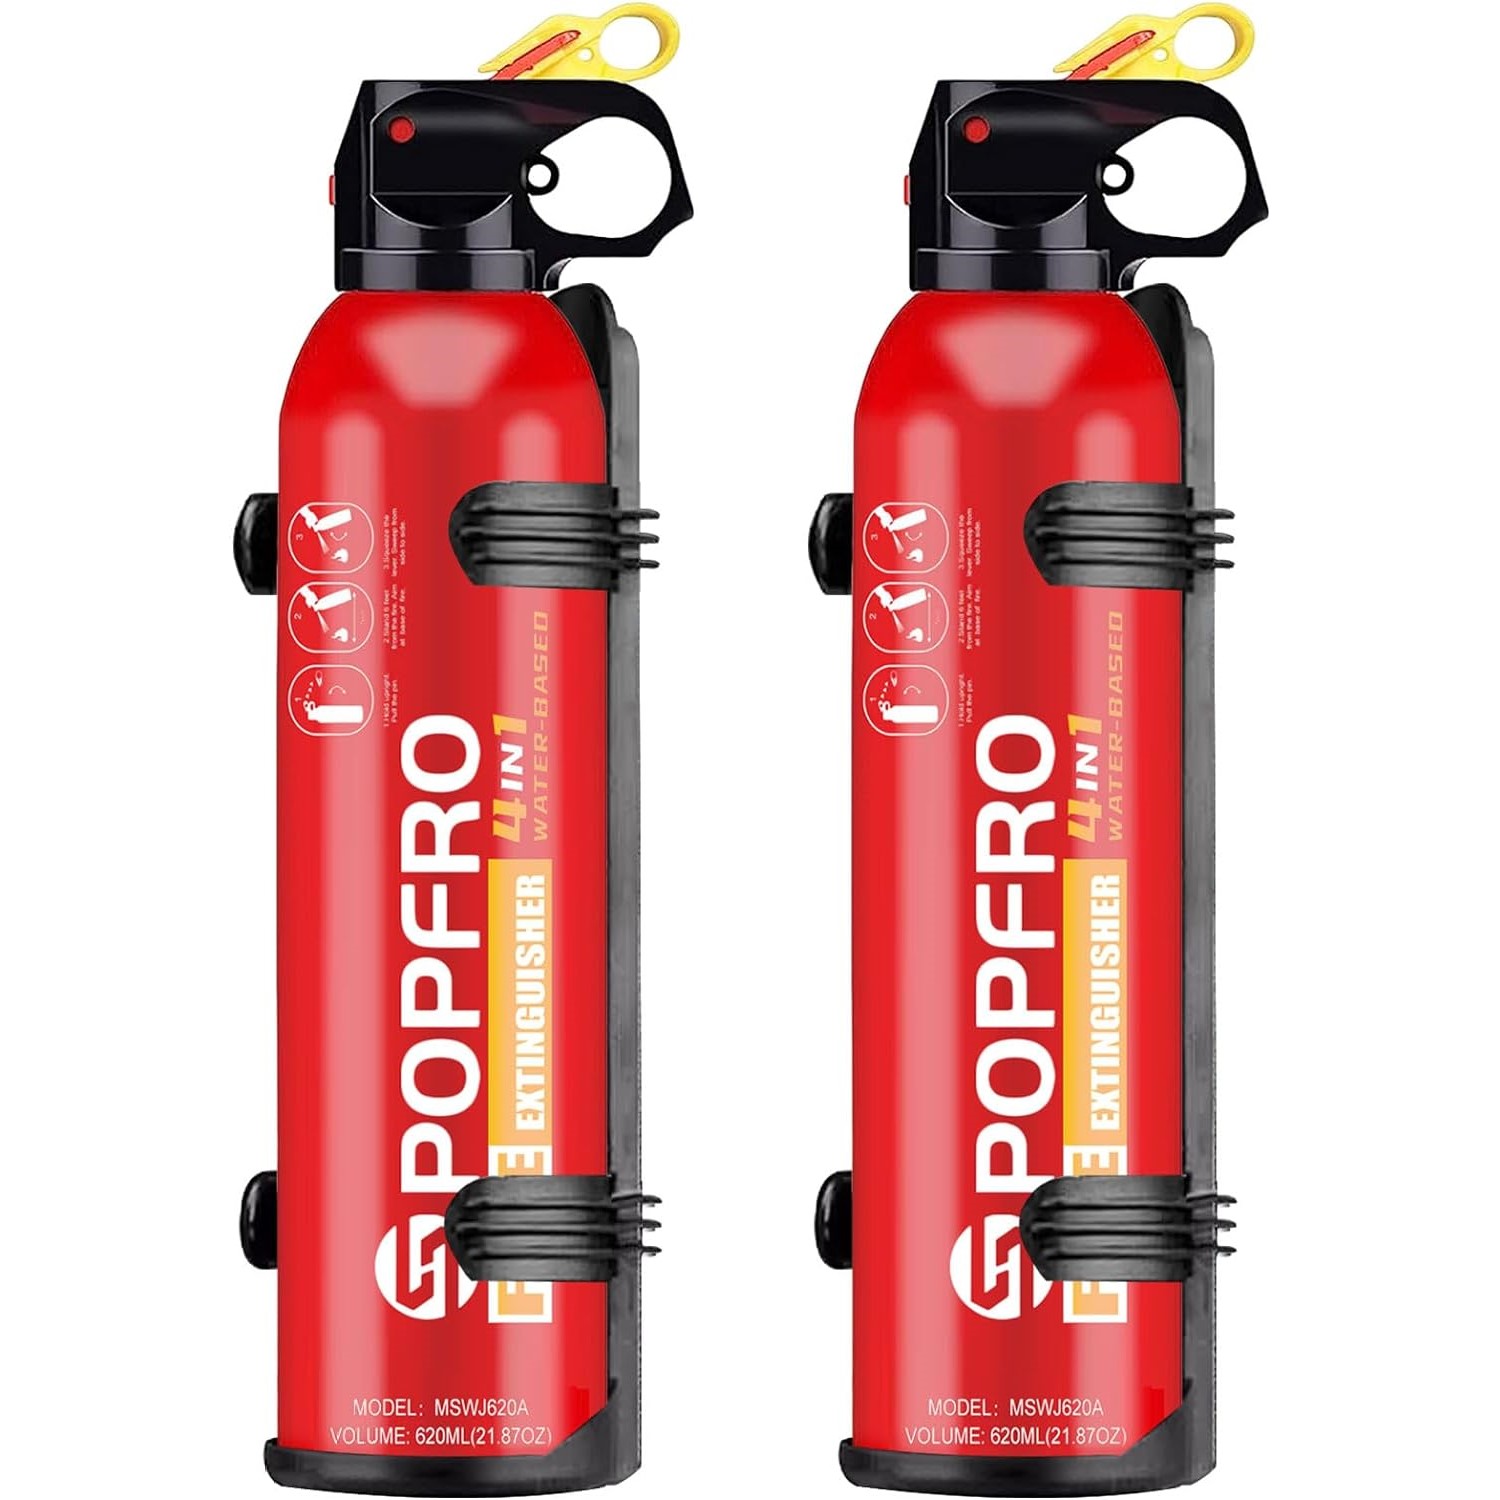 

2pcs/4pcs Portable Fire Extinguisher 4-in-1 Small Fire Extinguisher For Home, Garage, Kitchen, Car For Electric, Textile And Grease Fires Easy Clean Wall Mount Include